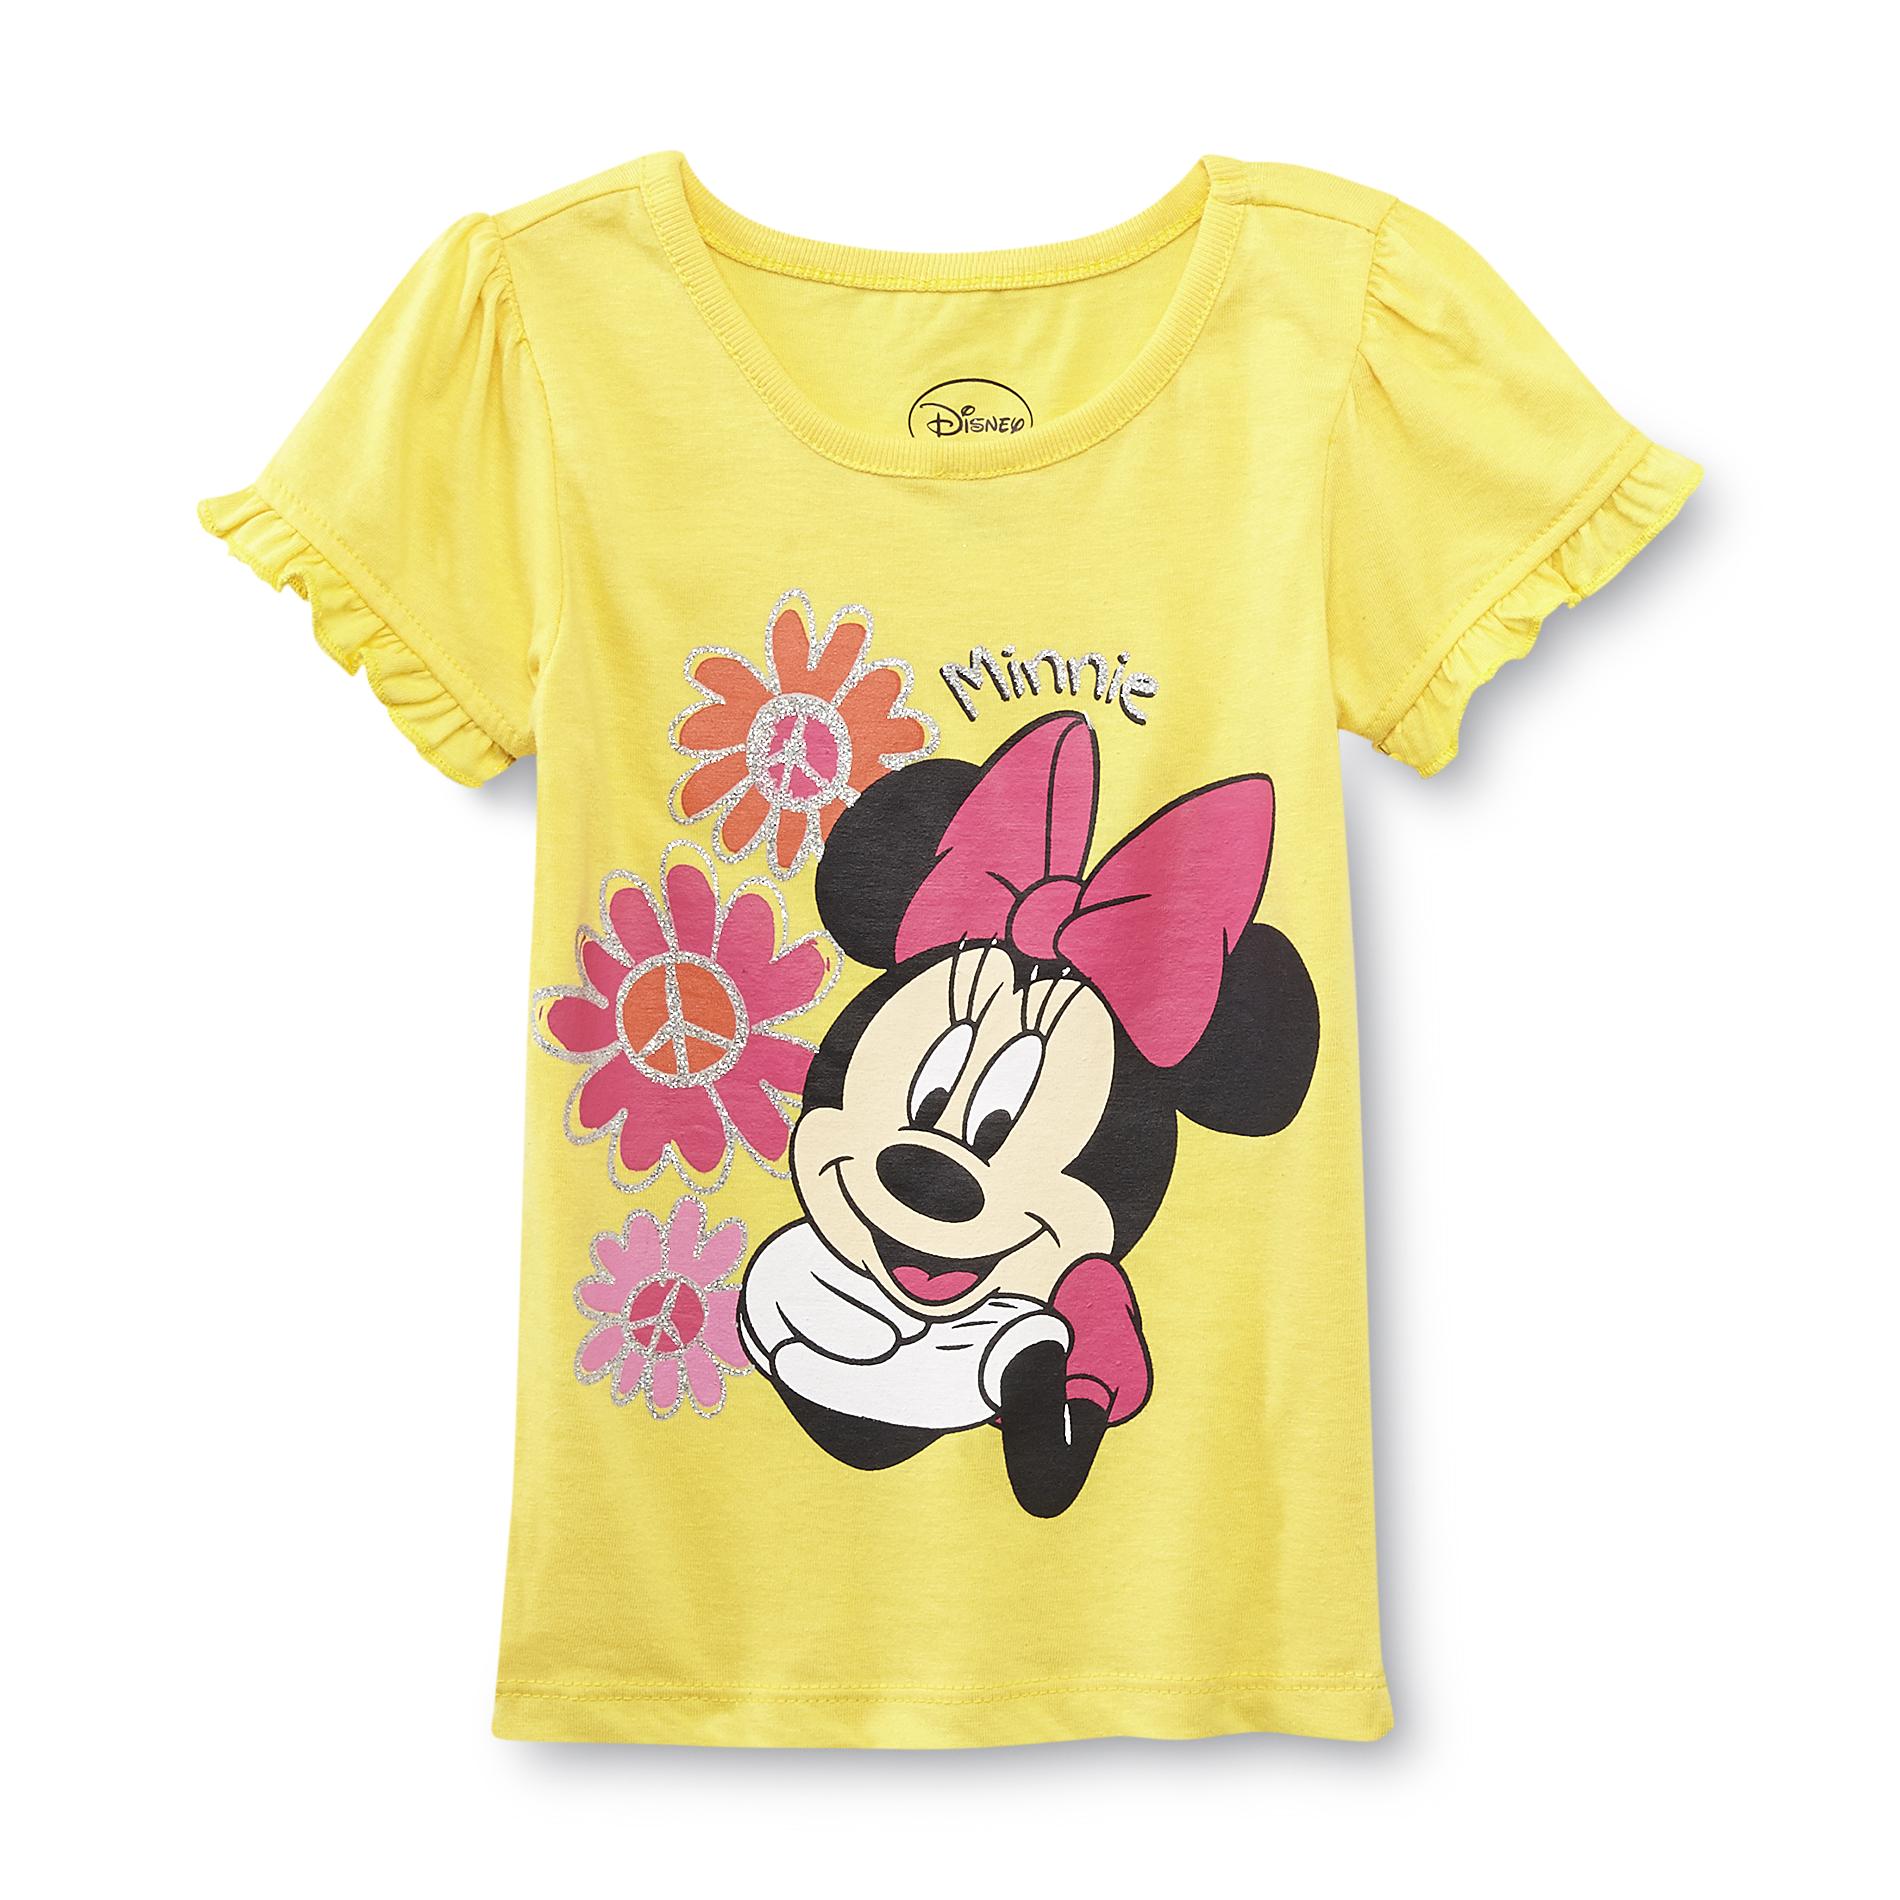 Minnie Mouse Toddler Girl's T-Shirt